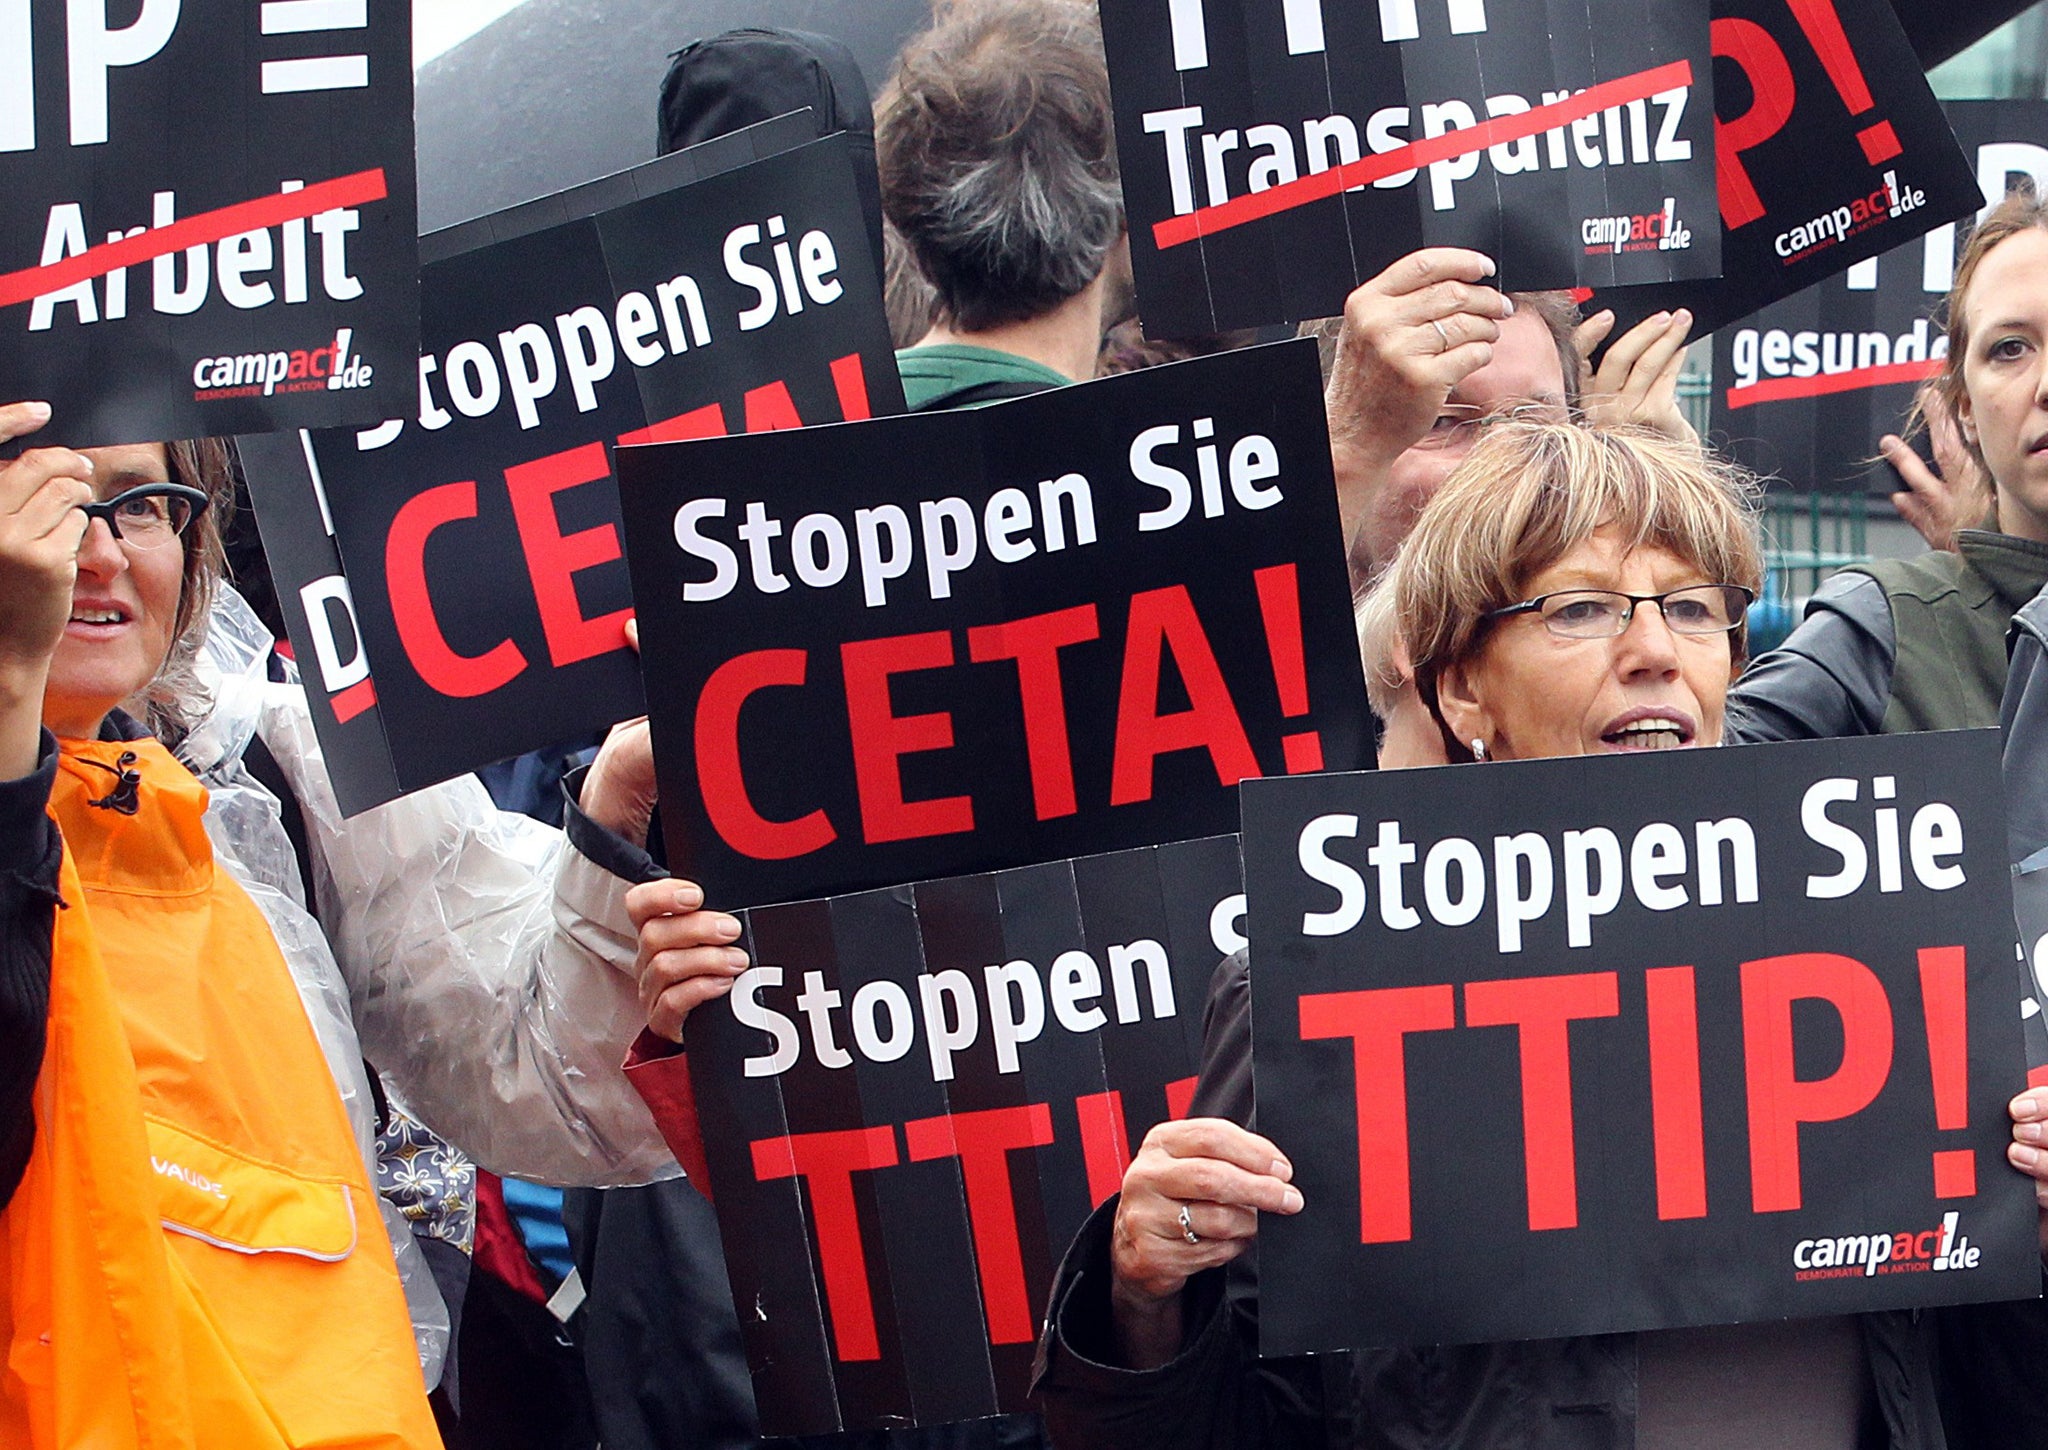 Protestors take part in a demonstration against TTIP and CETA in front of the party headquarters of the Social Democrate Party in Berlin on September 20, 2014